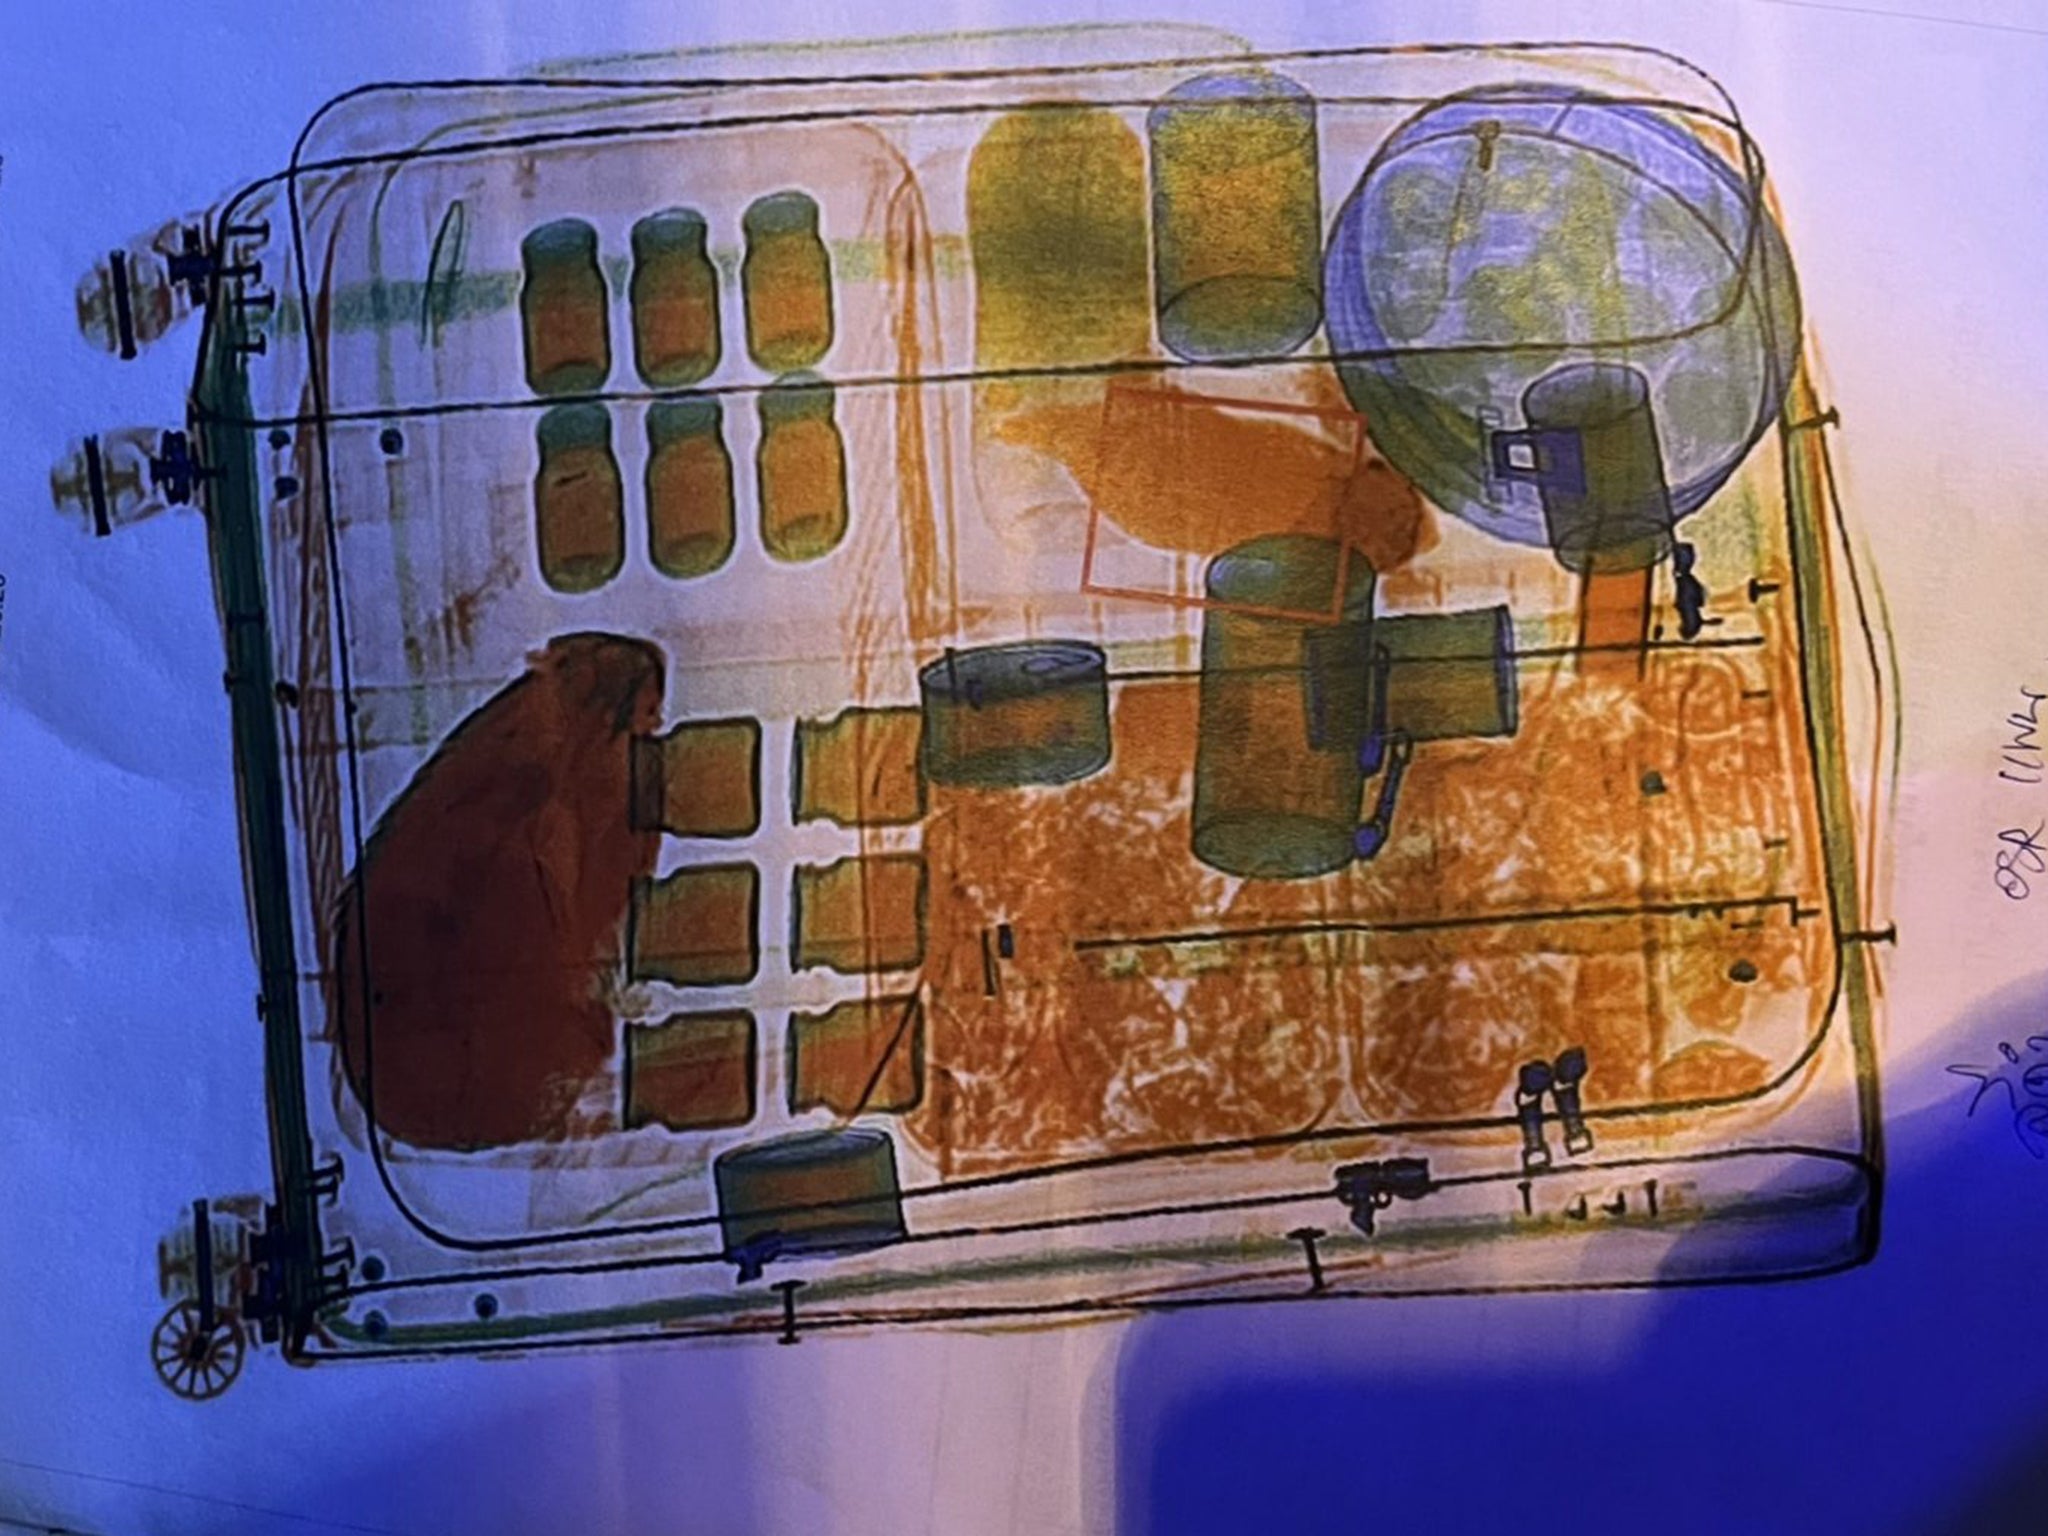 Rendering of X-ray of suitcase with animals inside